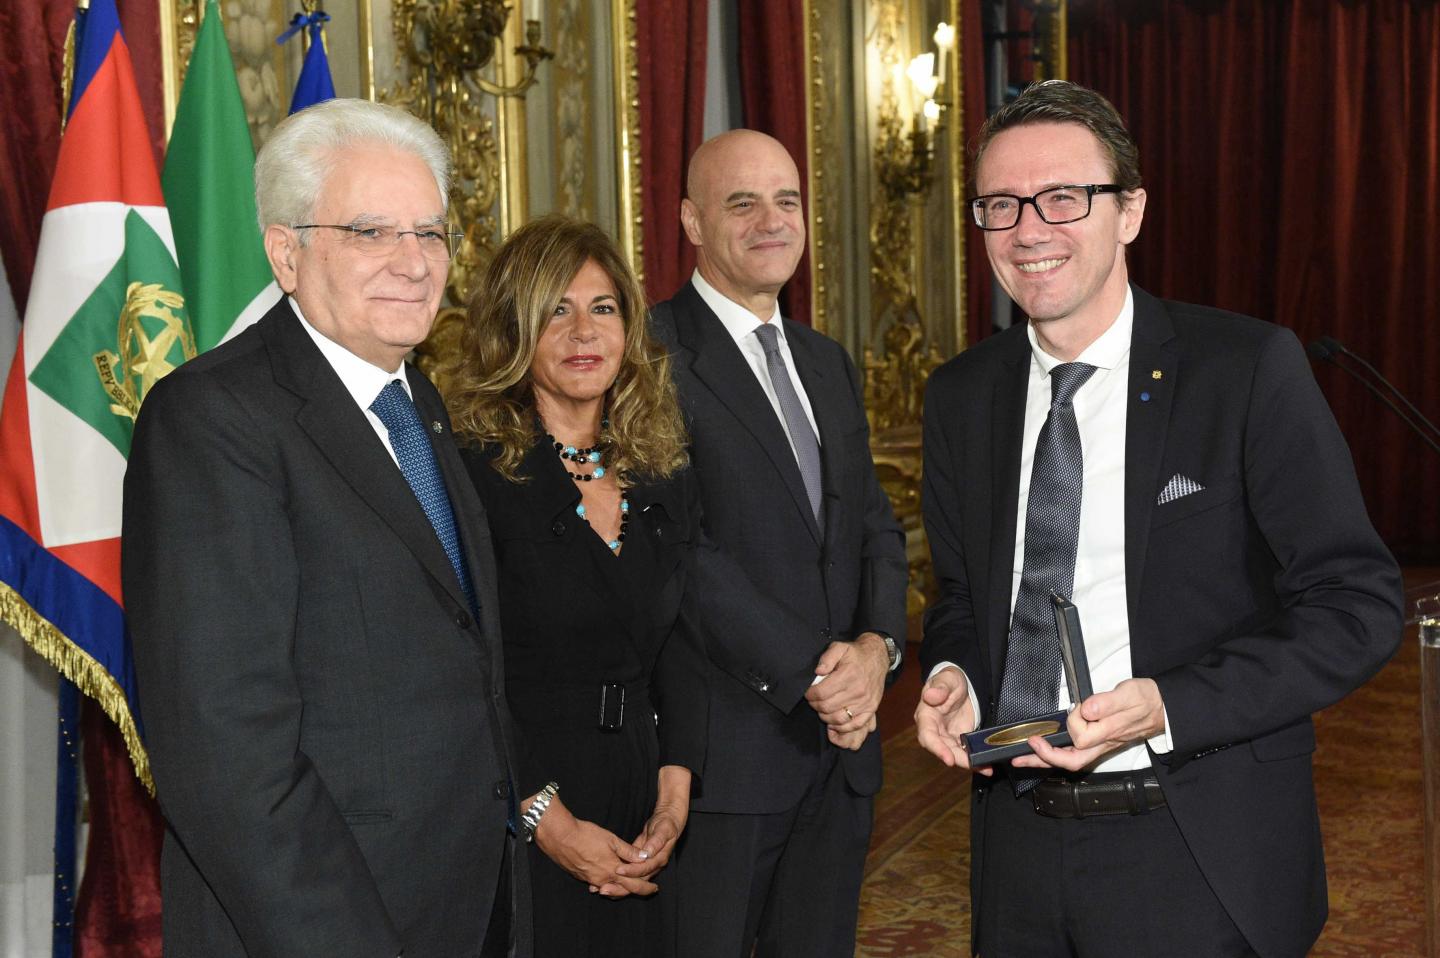 Jens Nielsen Honored by ENI for Research on the Production of Fuels From Renewables